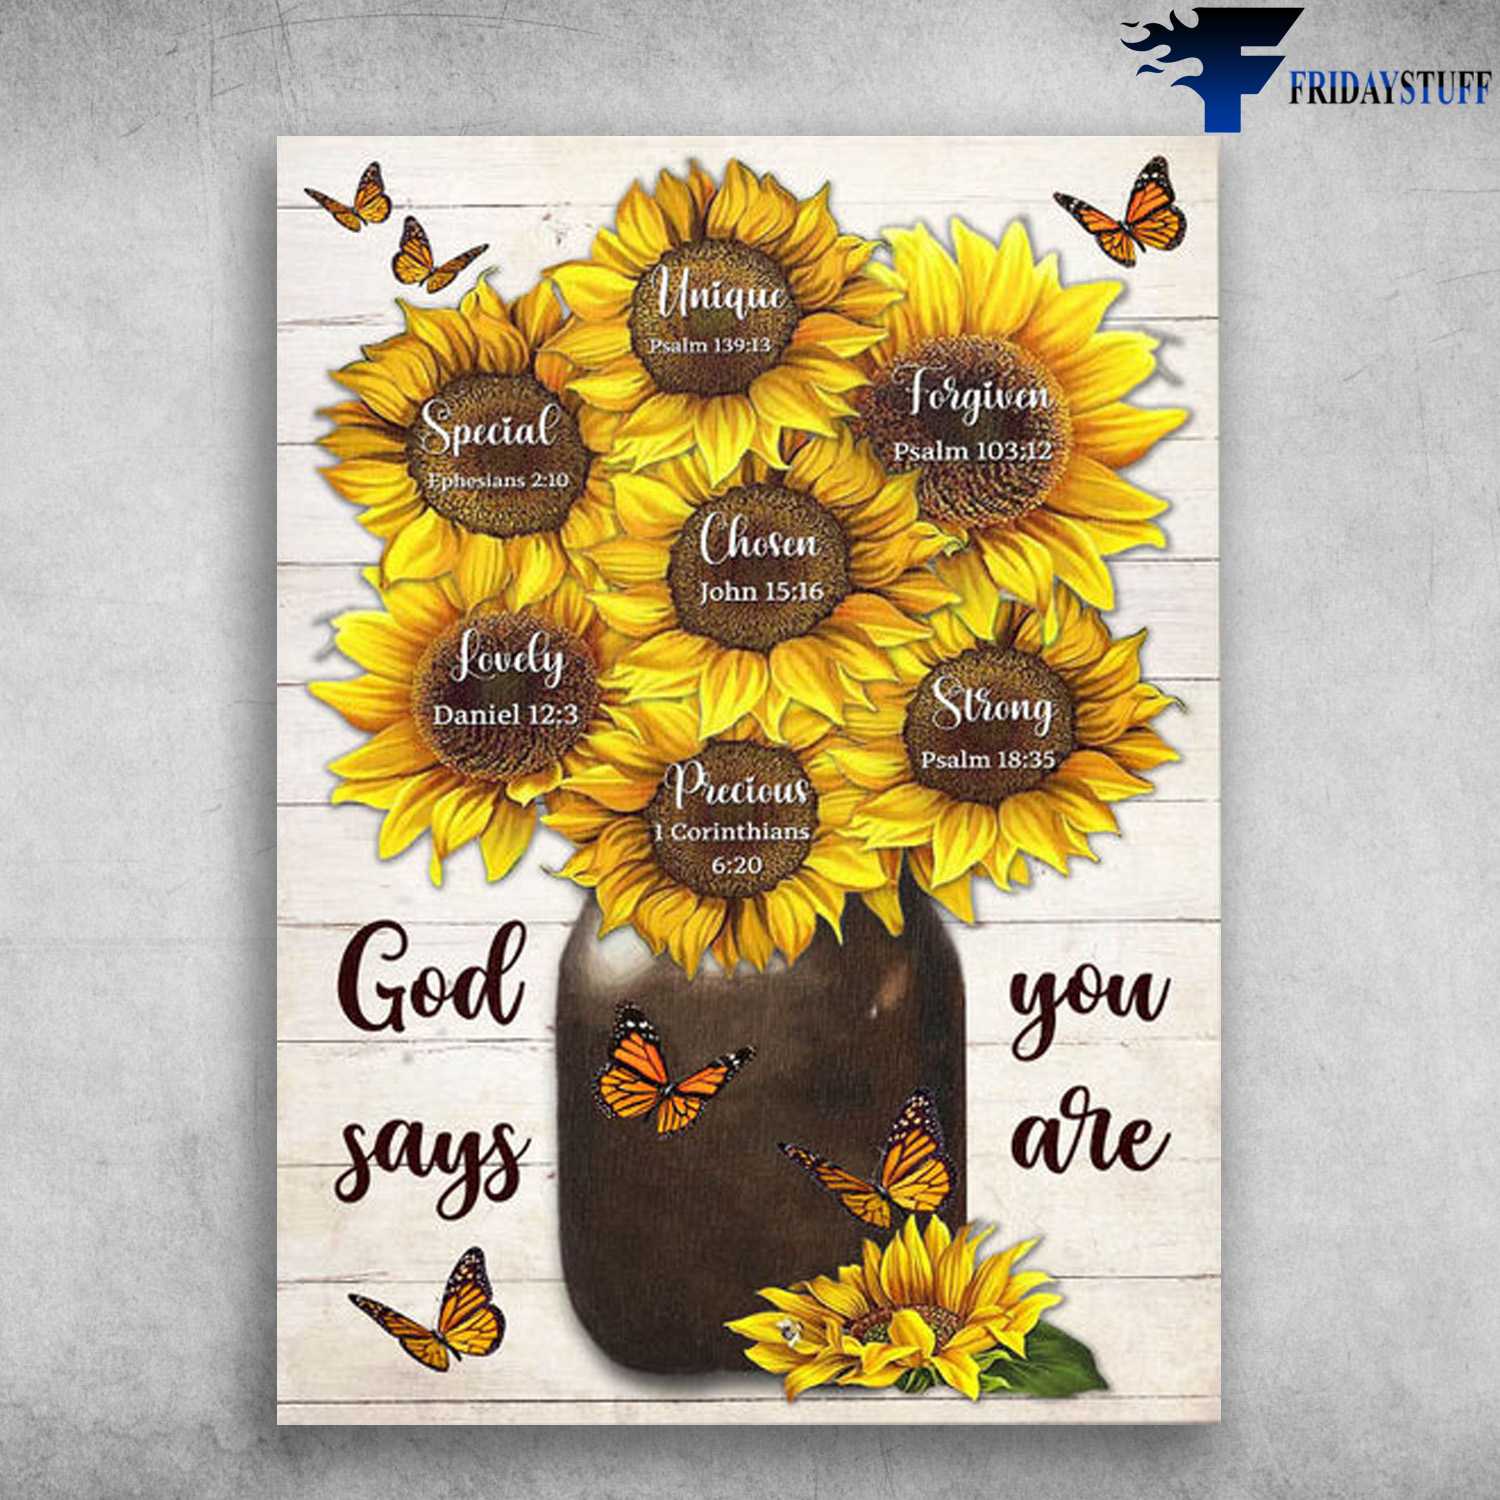 Butterfly Flower, Sunflower Poster - God Says You Are, Special, Unique, Forgiven, Chosen, Lovely, Strong, Precious